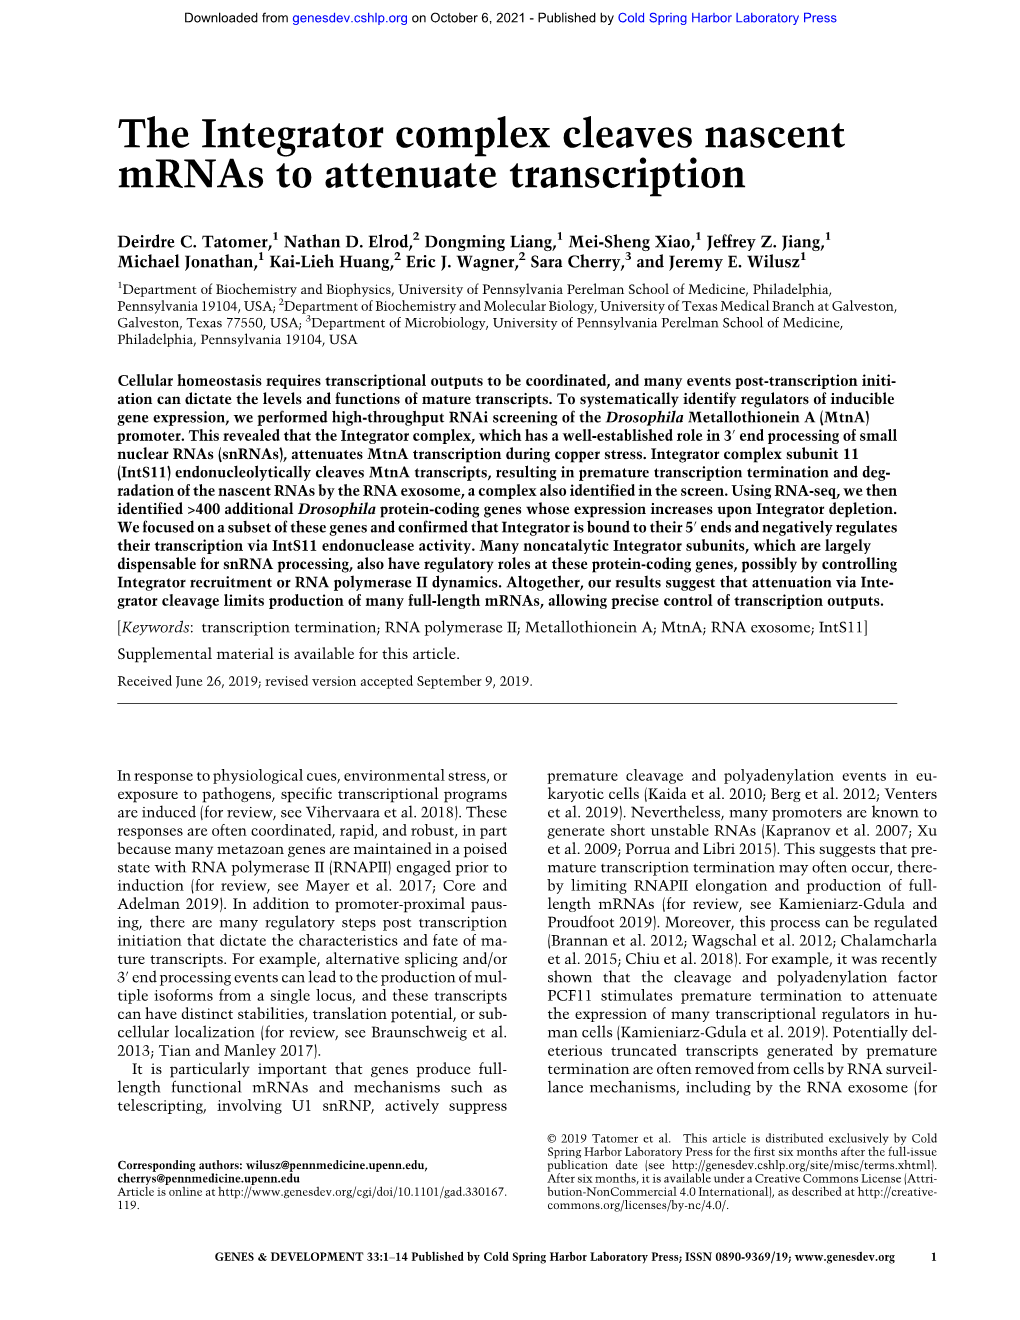 The Integrator Complex Cleaves Nascent Mrnas to Attenuate Transcription